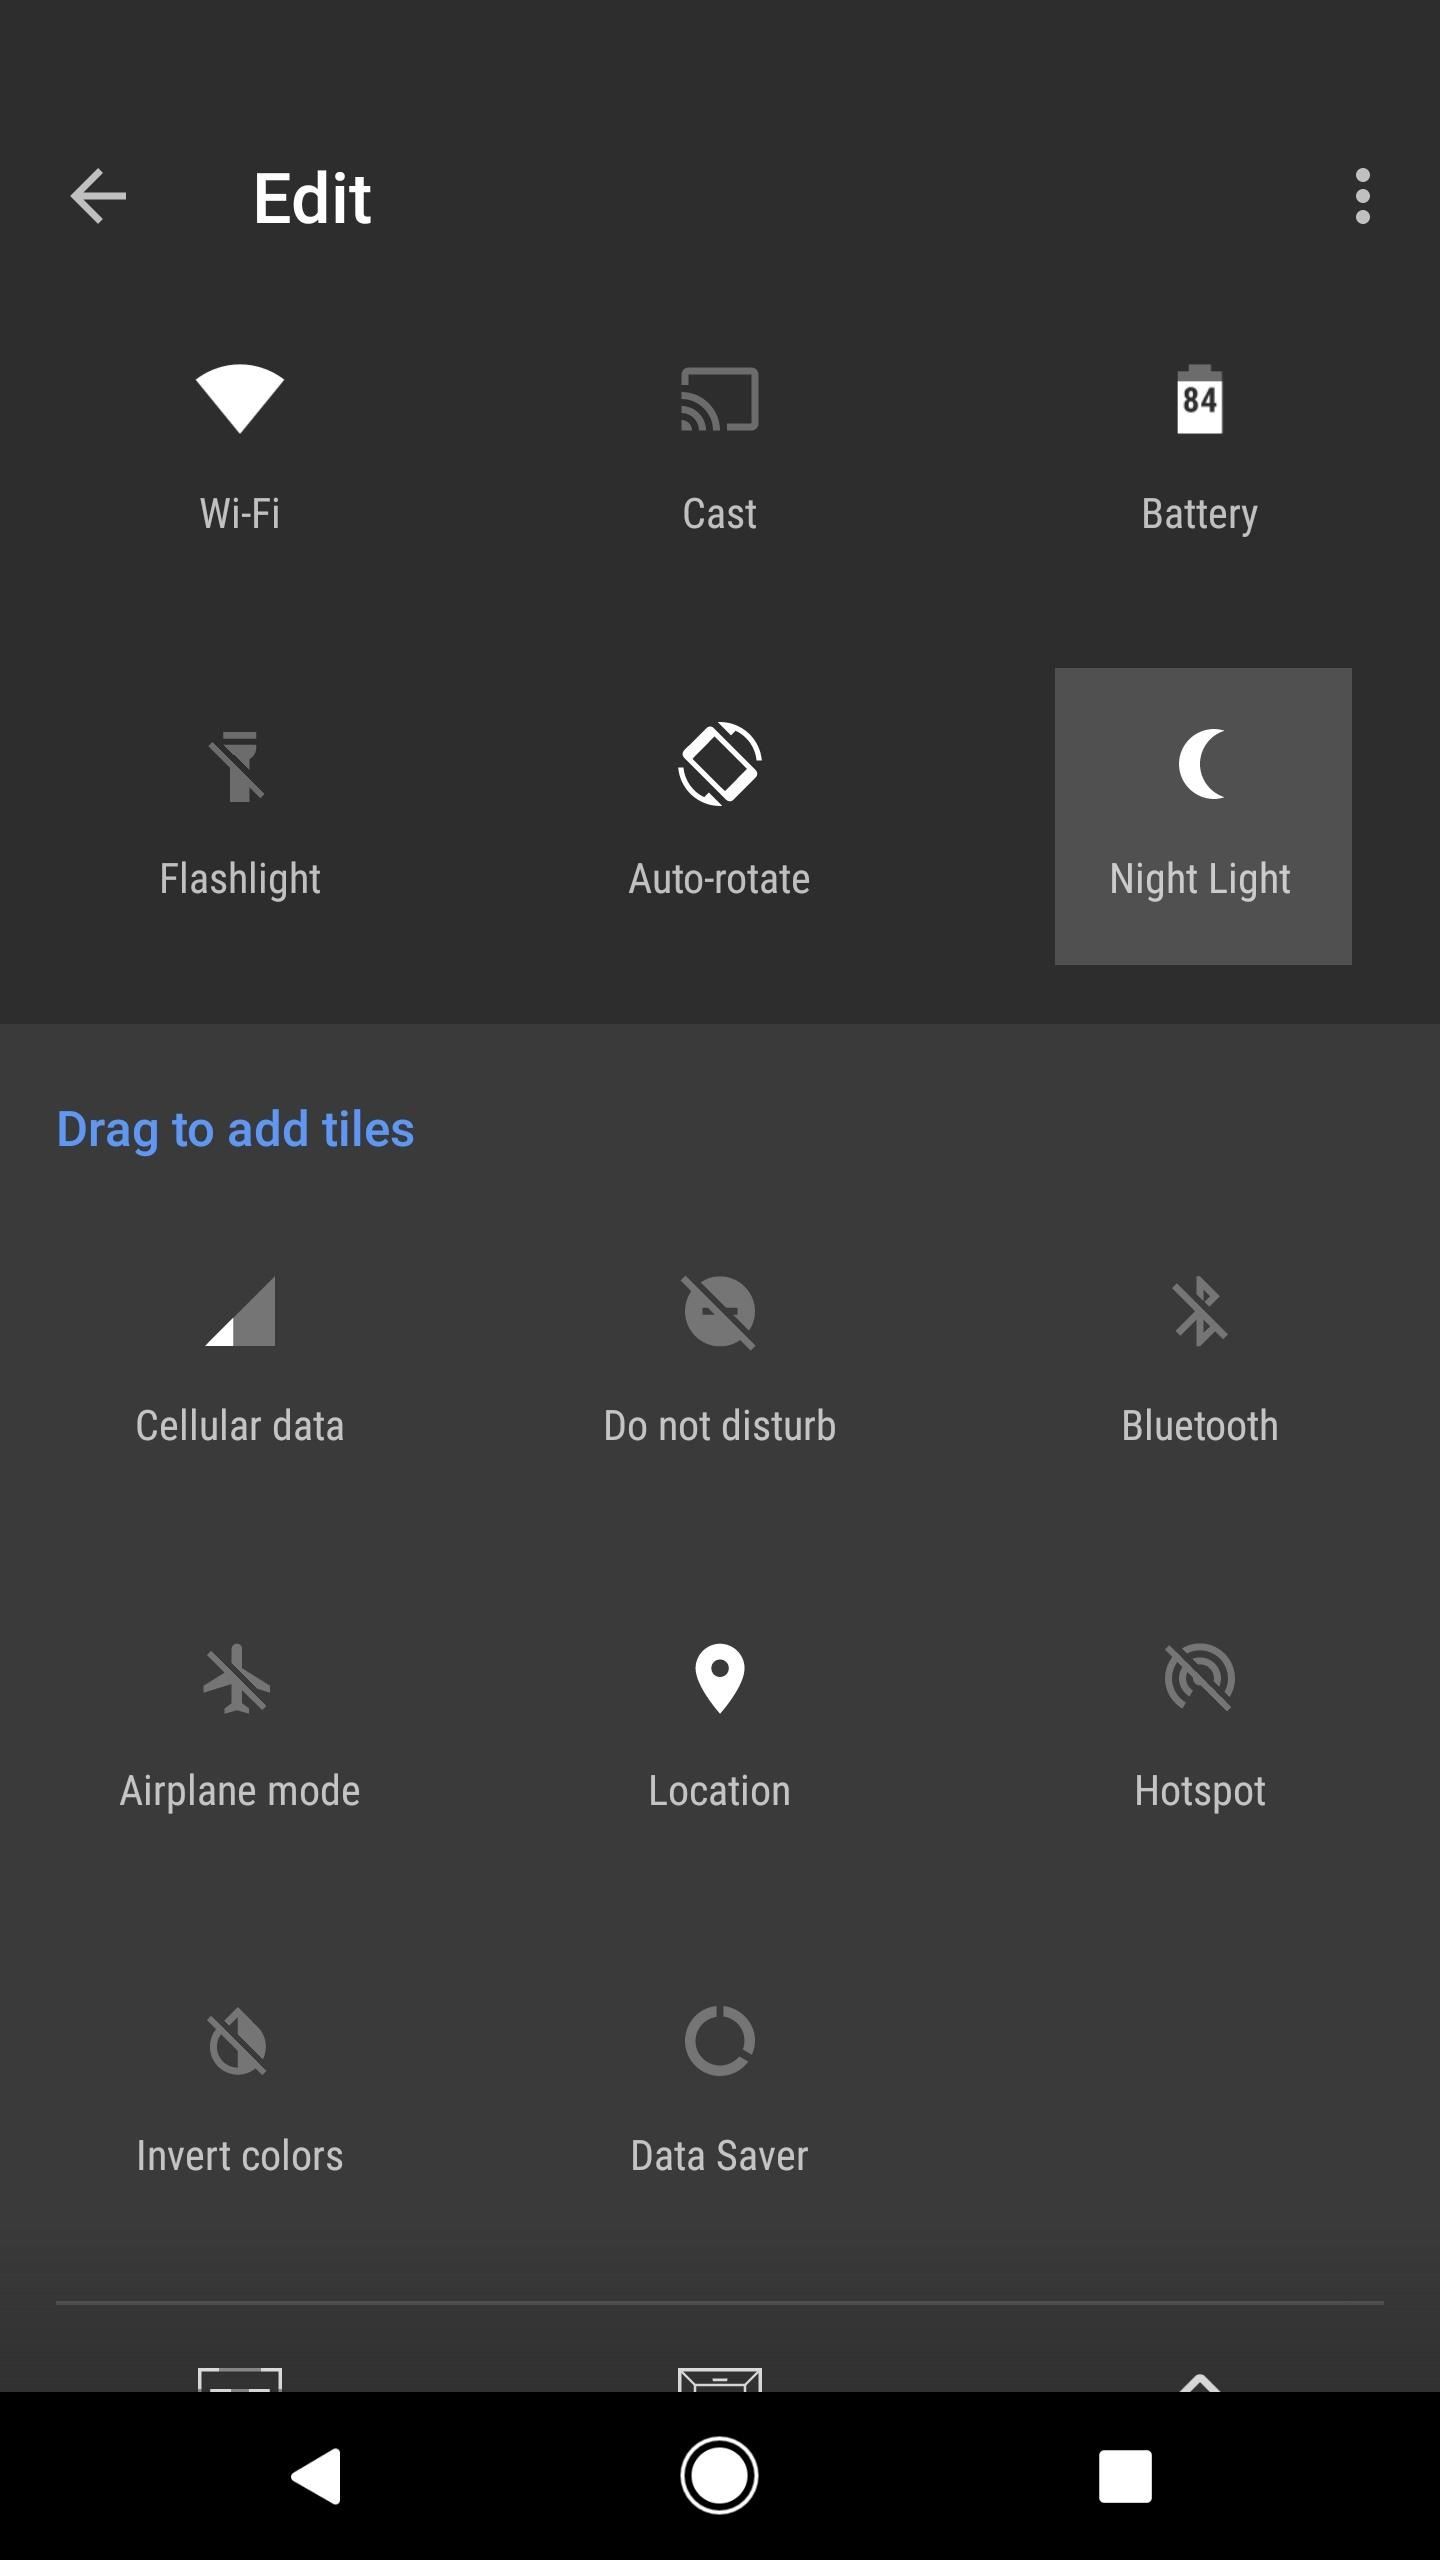 How to Turn on Google Pixel's 'Night Light' Function to Sleep Better